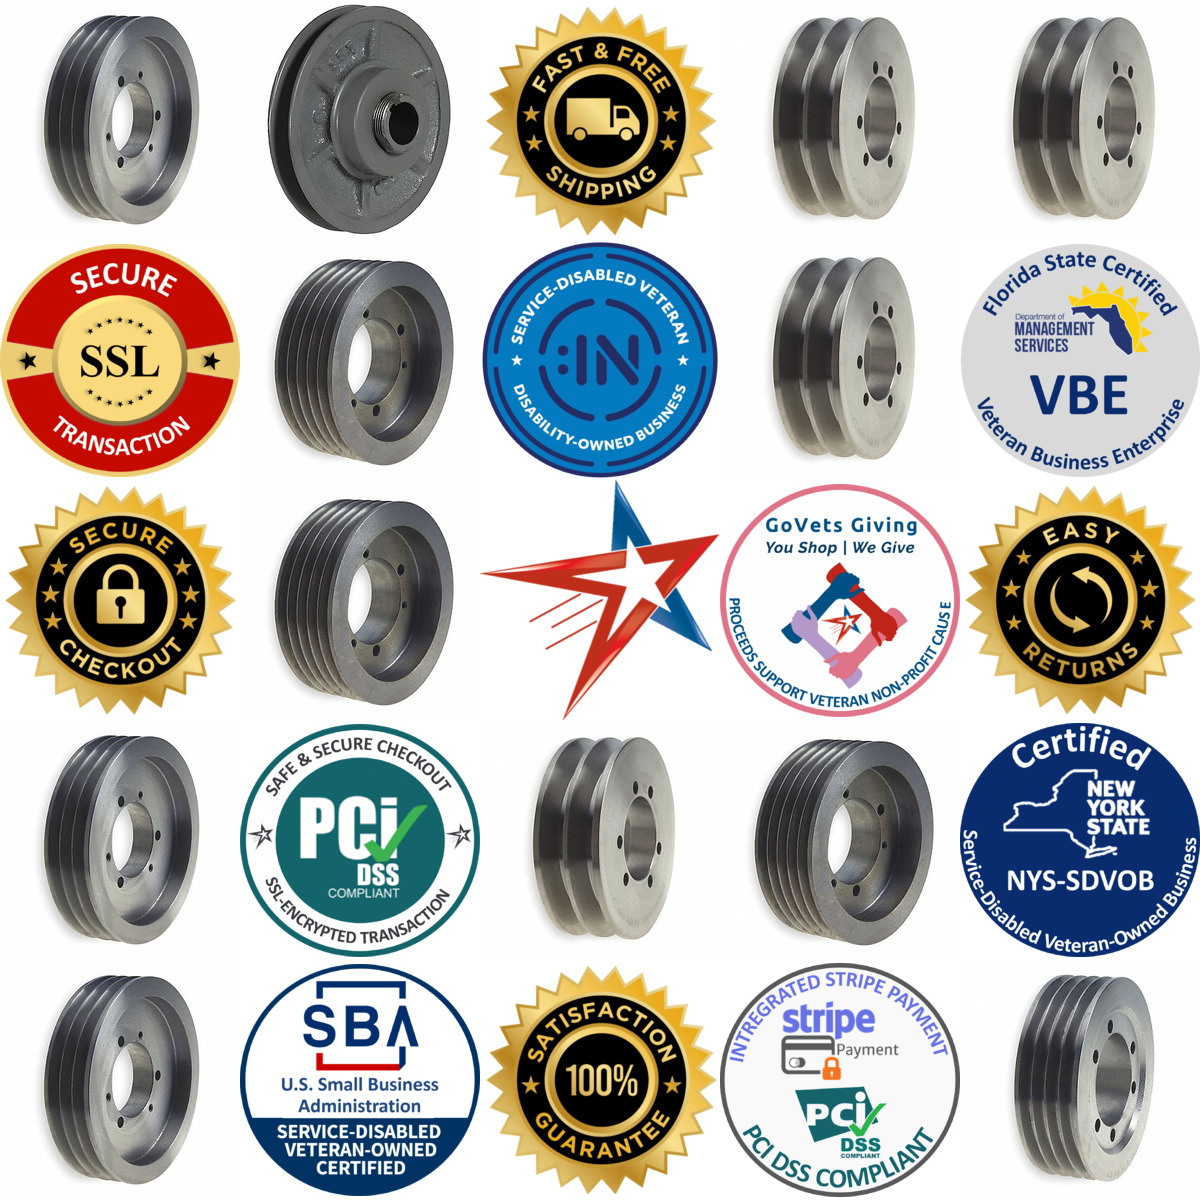 A selection of Bushing Bore v Belt Pulleys products on GoVets